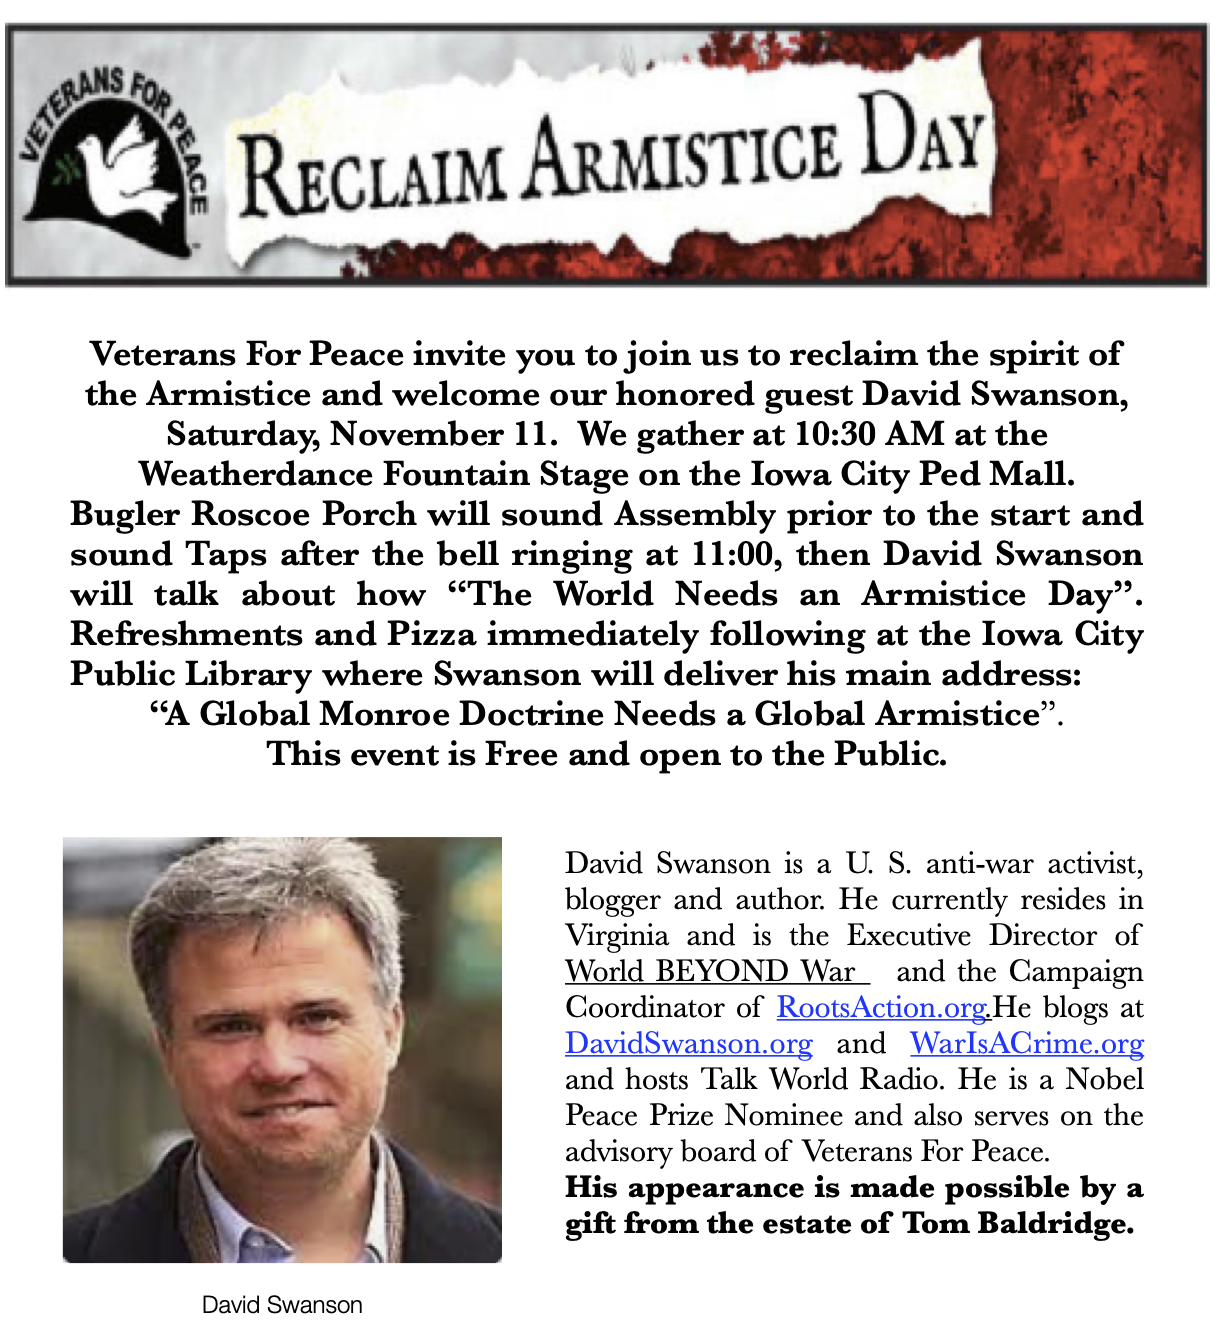 Reclaim Armistice Day. Veterans For Peace invite you to join us to reclaim the spirit of the Armistice and welcome our honored guest David Swanson, Saturday, November 11. We gather at 10:30 AM at the Weatherdance Fountain Stage on the Iowa City Ped Mall. Bugler Roscoe Porch will sound Assembly prior to the start and sound Taps after the bell ringing at 11:00, then David Swanson will talk about how “The World Needs an Armistice Day”. Refreshments and Pizza immediately following at the Iowa City Public Library where Swanson will deliver his main address: “A Global Monroe Doctrine Needs a Global Armistice”. This event is Free and open to the Public. David Swanson is a U. S. anti-war activist, blogger and author. He currently resides in Virginia and is the Executive Director of World BEYOND War and the Campaign Coordinator of RootsAction.org. He blogs at DavidSwanson.org and WarIsACrime.org and hosts Talk World Radio. He is a Nobel Peace Prize Nominee and also serves on the advisory board of Veterans For Peace. His appearance is made possible by a gift from the estate of Tom Baldridge.